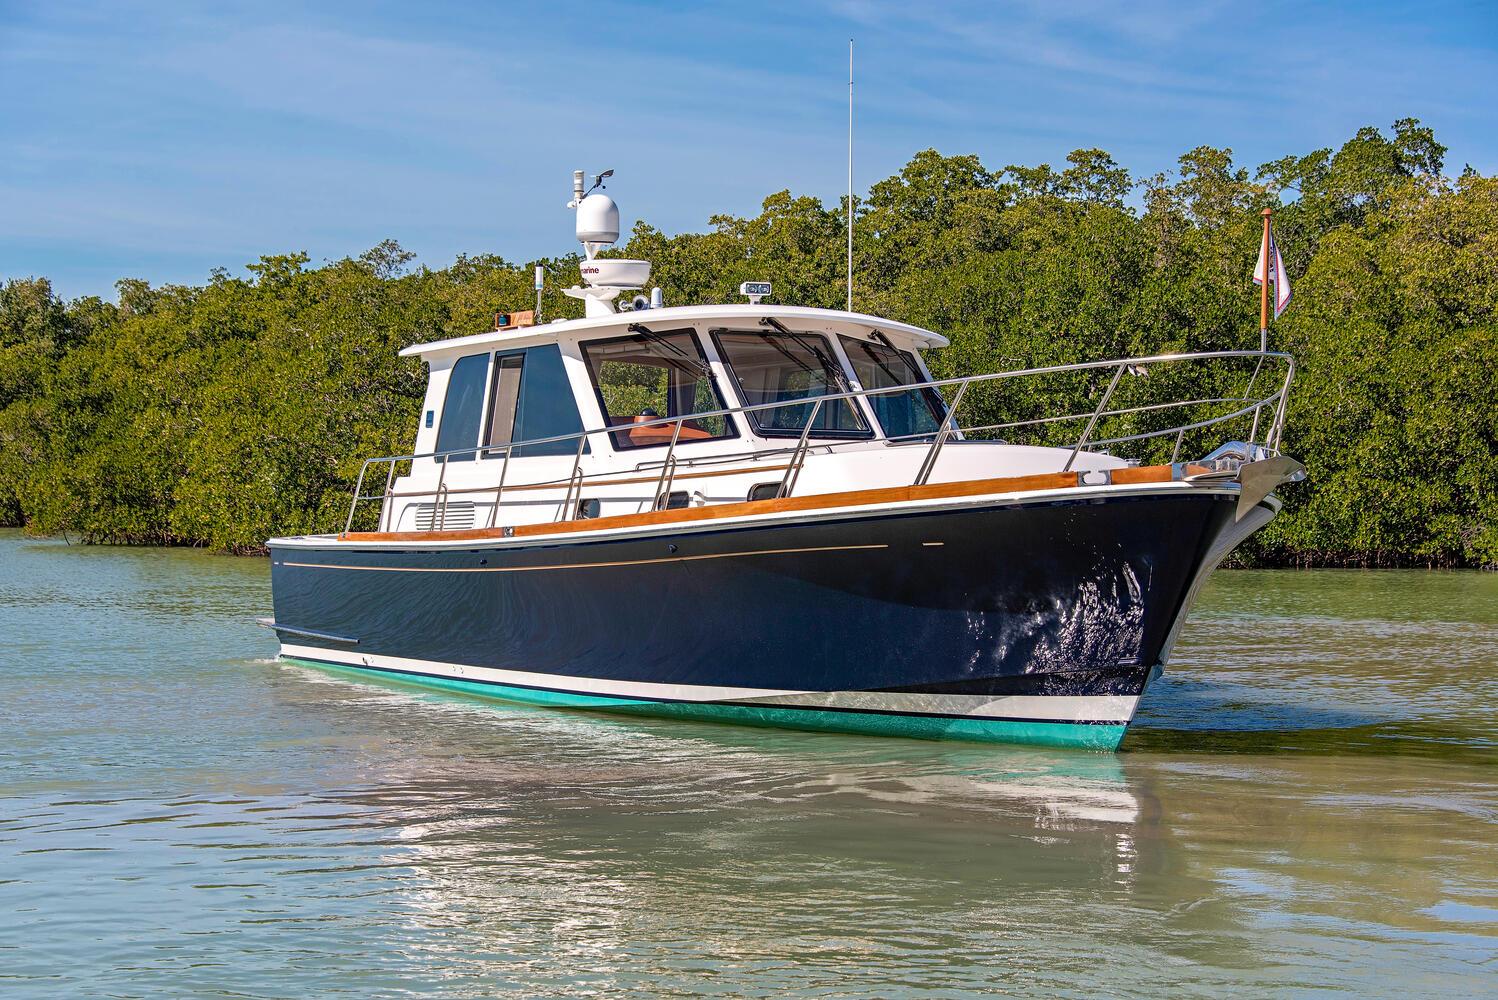 45 Grand Banks 2009 Madrine Naples, Florida Sold on 2021-04-26 by Denison Yacht Sales